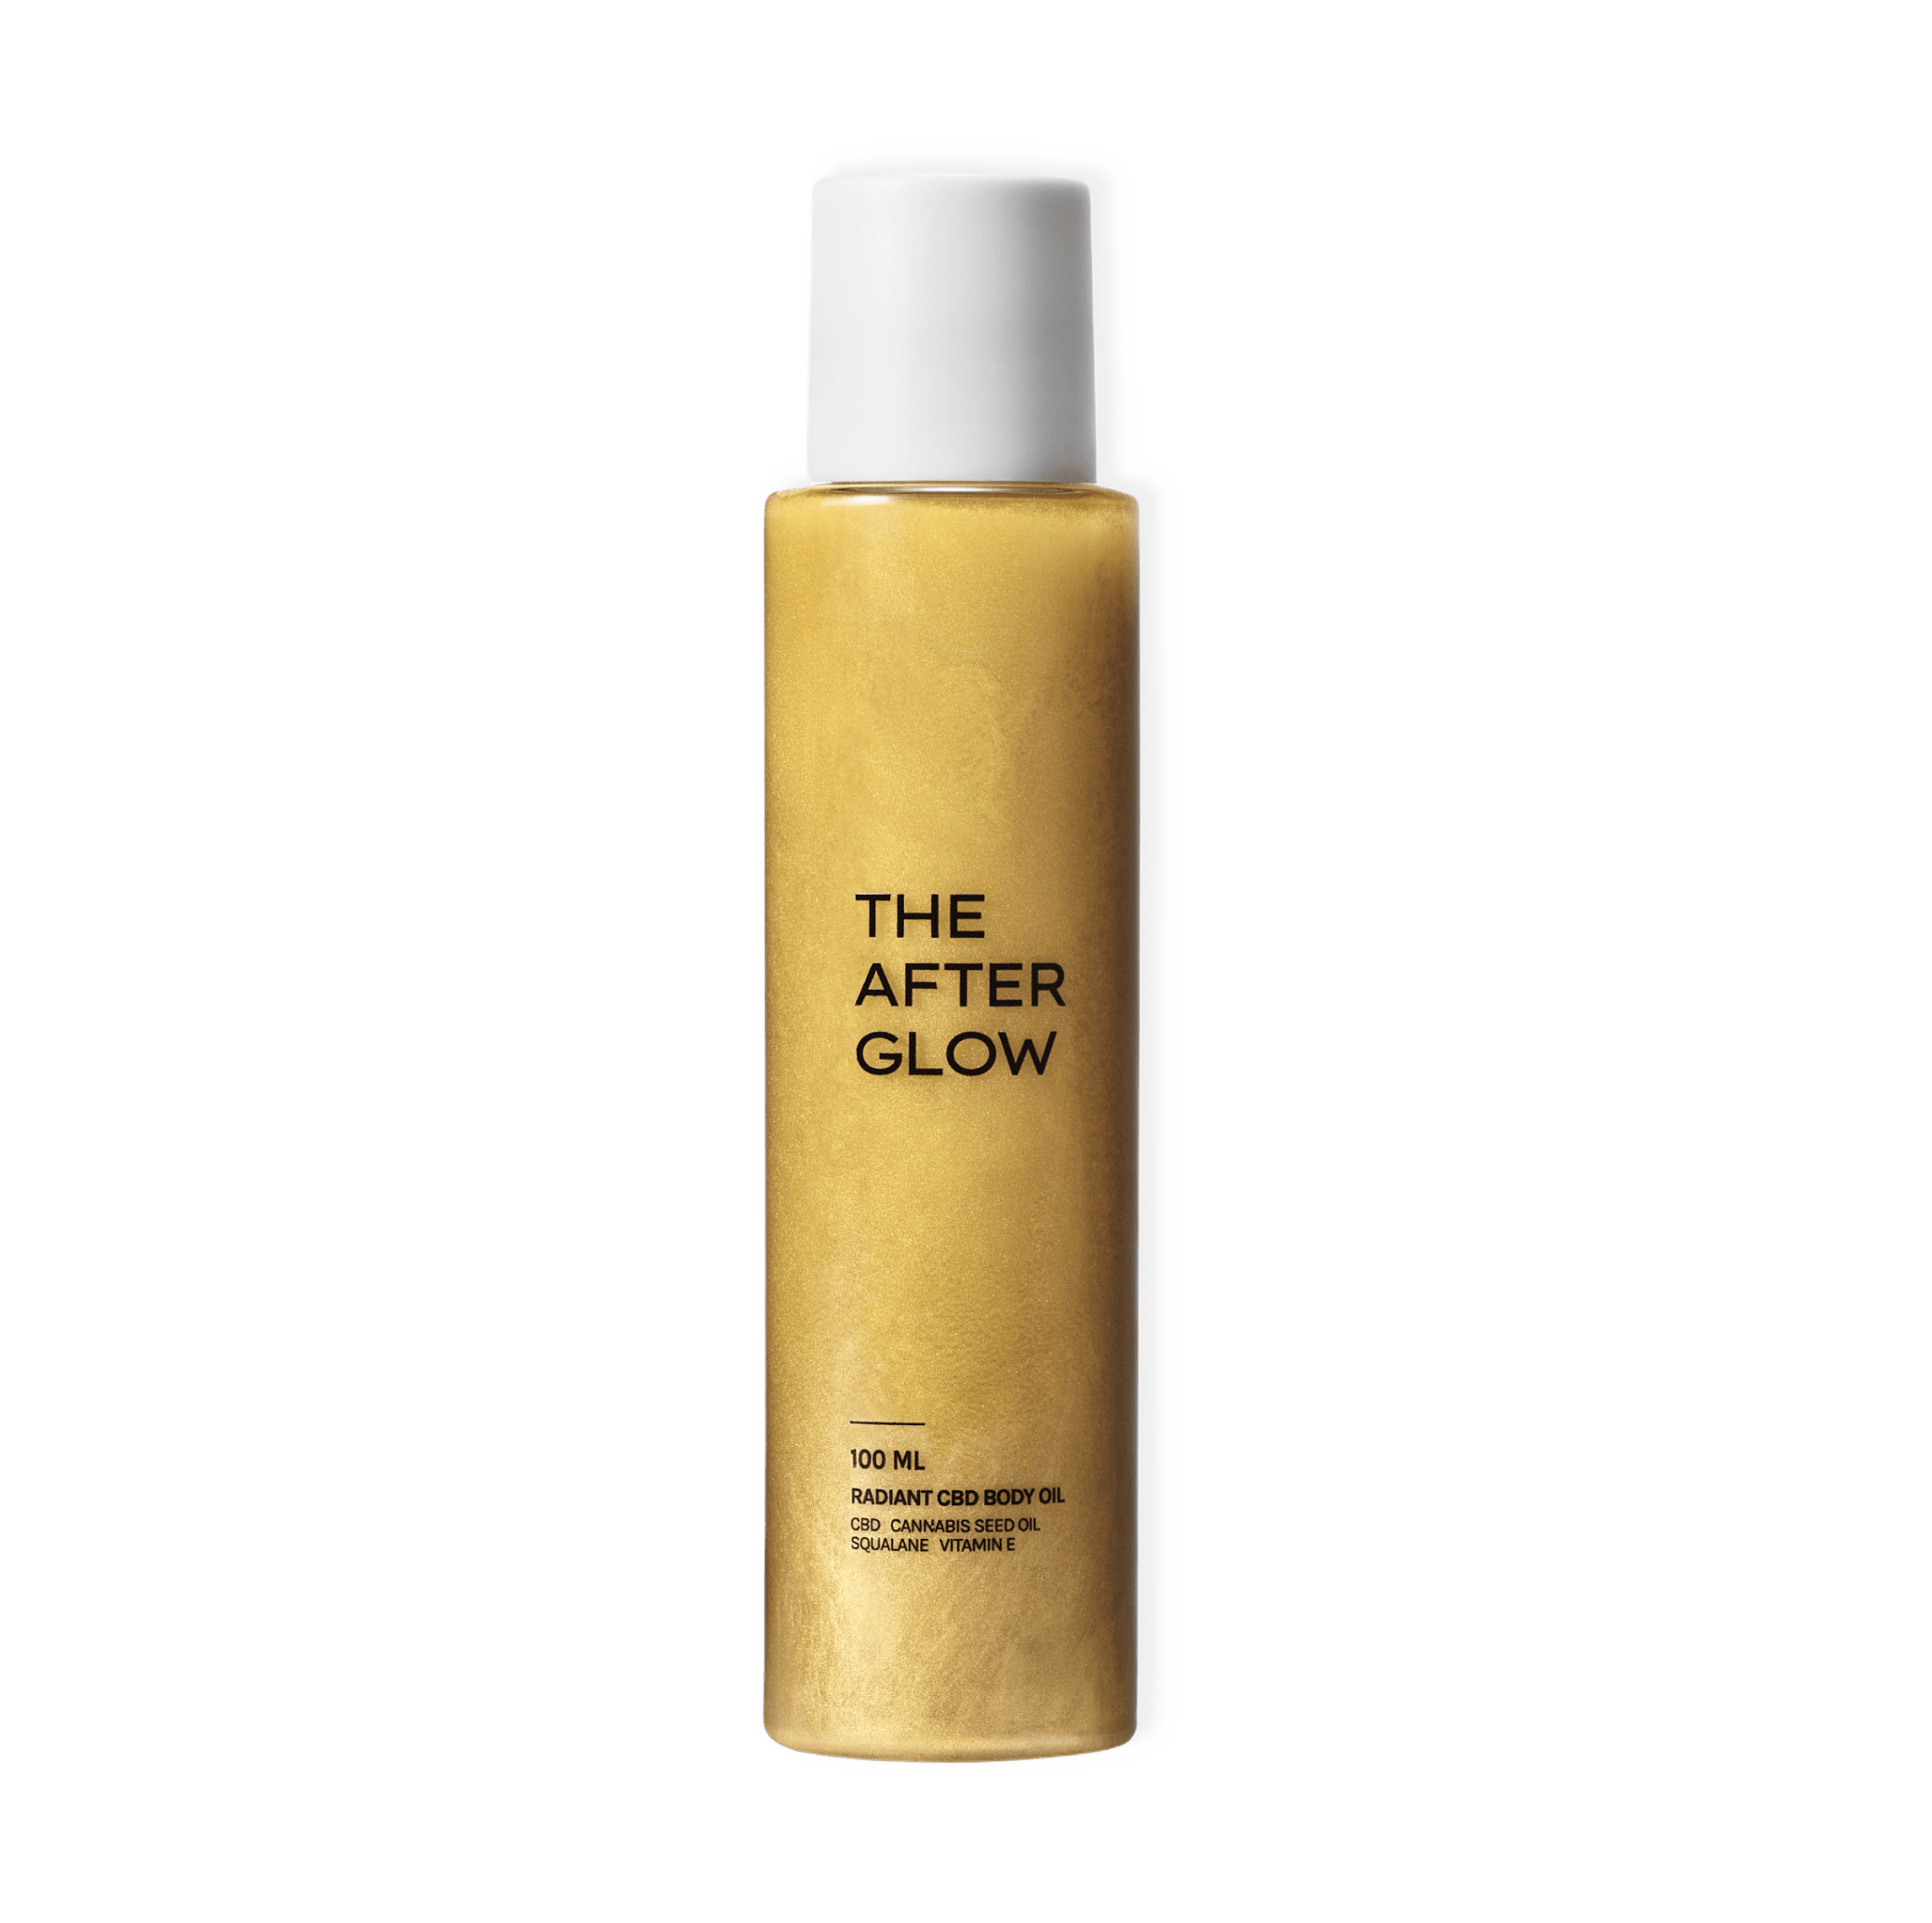 The After Glow – Radiance-boosting CBD body oil från Mantle